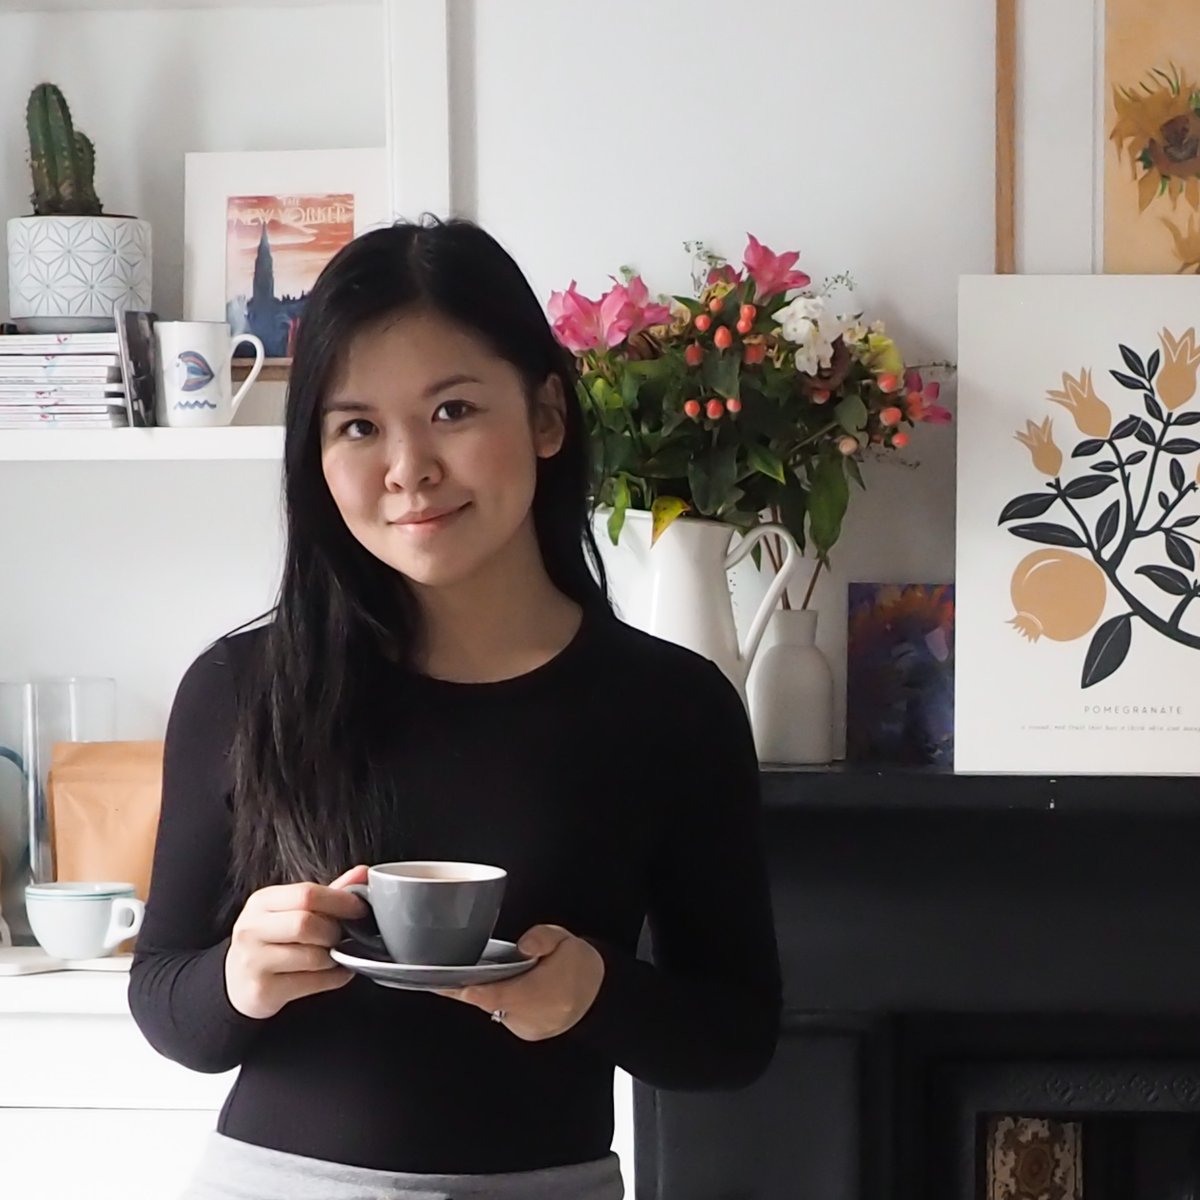 Cassandra Liu shares how feeling homesick during lockdown prompted her to co-launch CHA DONG, a Hong Kong style milk tea brand with her husband ☕ Read more here: ow.ly/zBCQ50IkQjf @mission_kitchen @wandbc @NineElmsTeam #FemaleFounder #SupportLocal